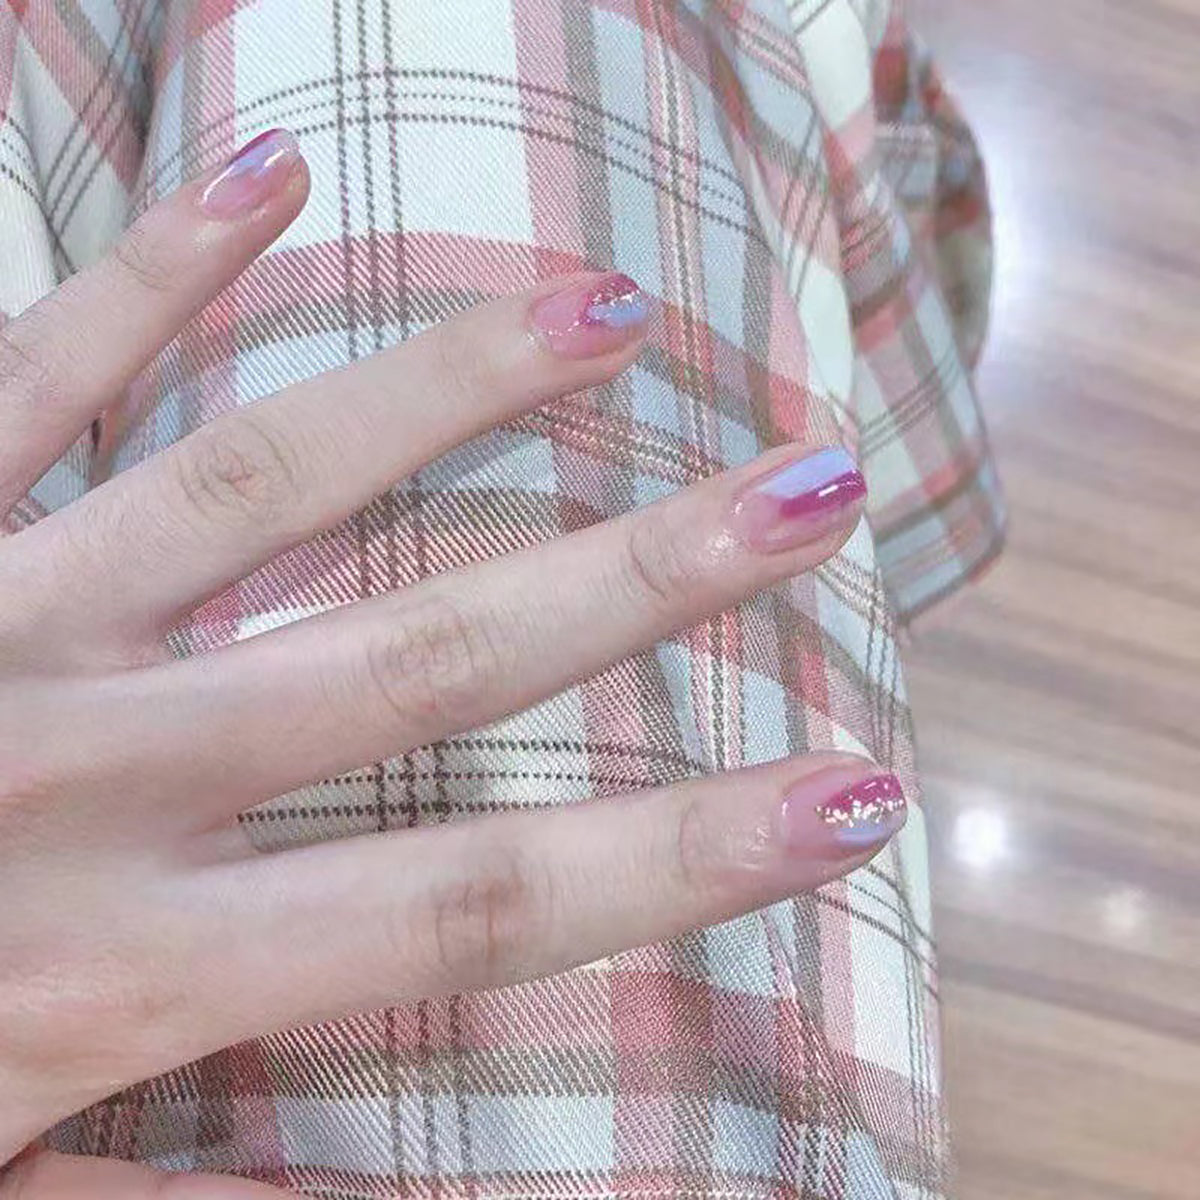 Glossy Stick On Nails with Pink and Blue Swaps